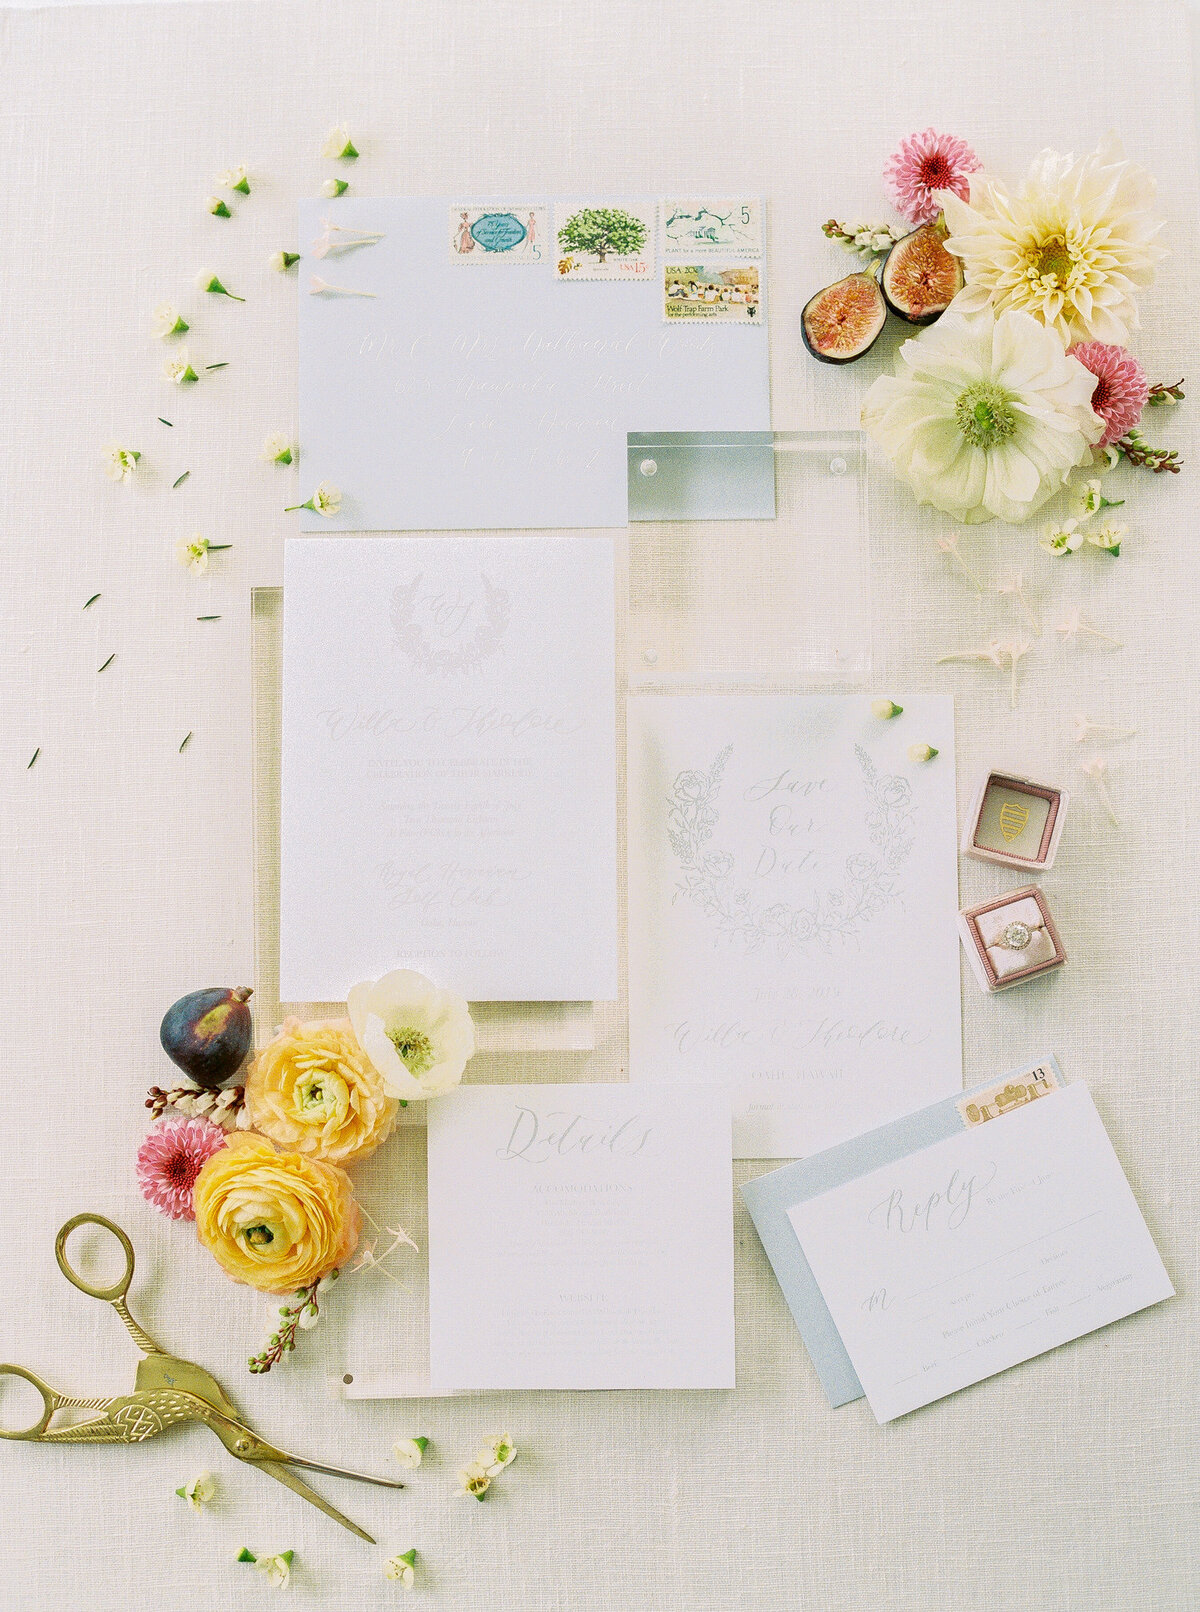 Anna Claire Calligraphy | Hawaii Wedding & Lifestyle Photography | Ashley Goodwin Photography